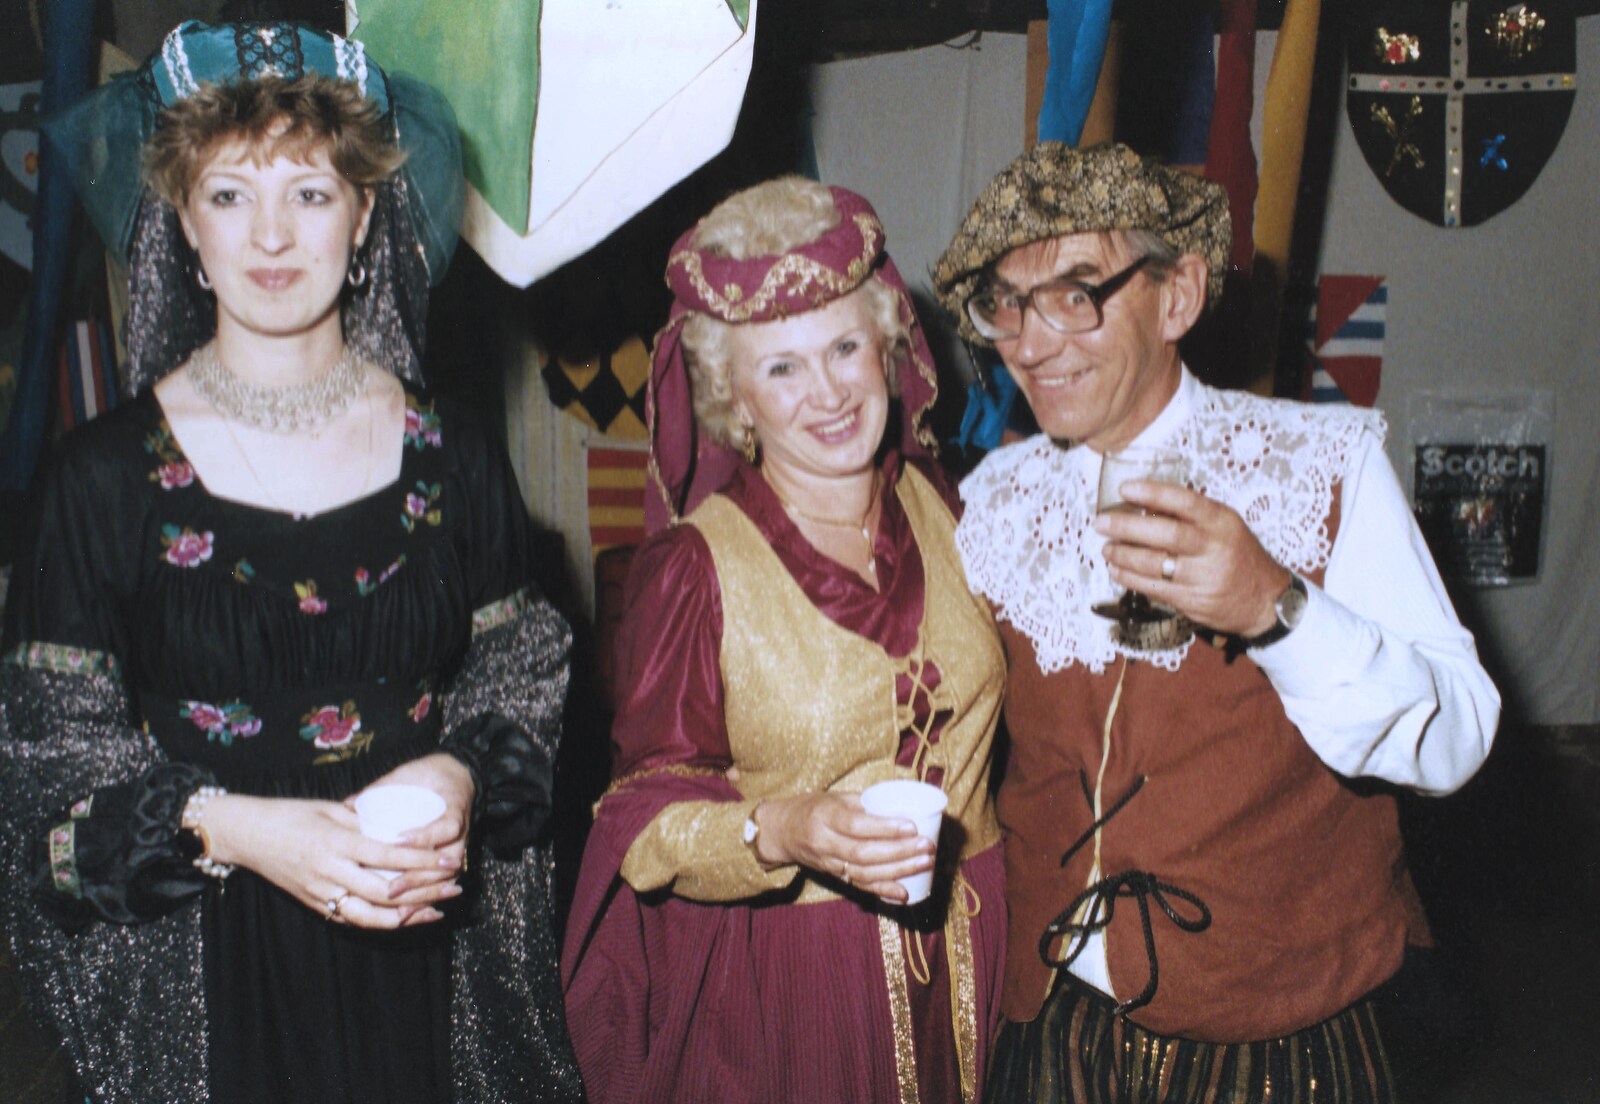 Derek with some guests from A Mediaeval Birthday Party, Starston, Norfolk - 27th July 1990